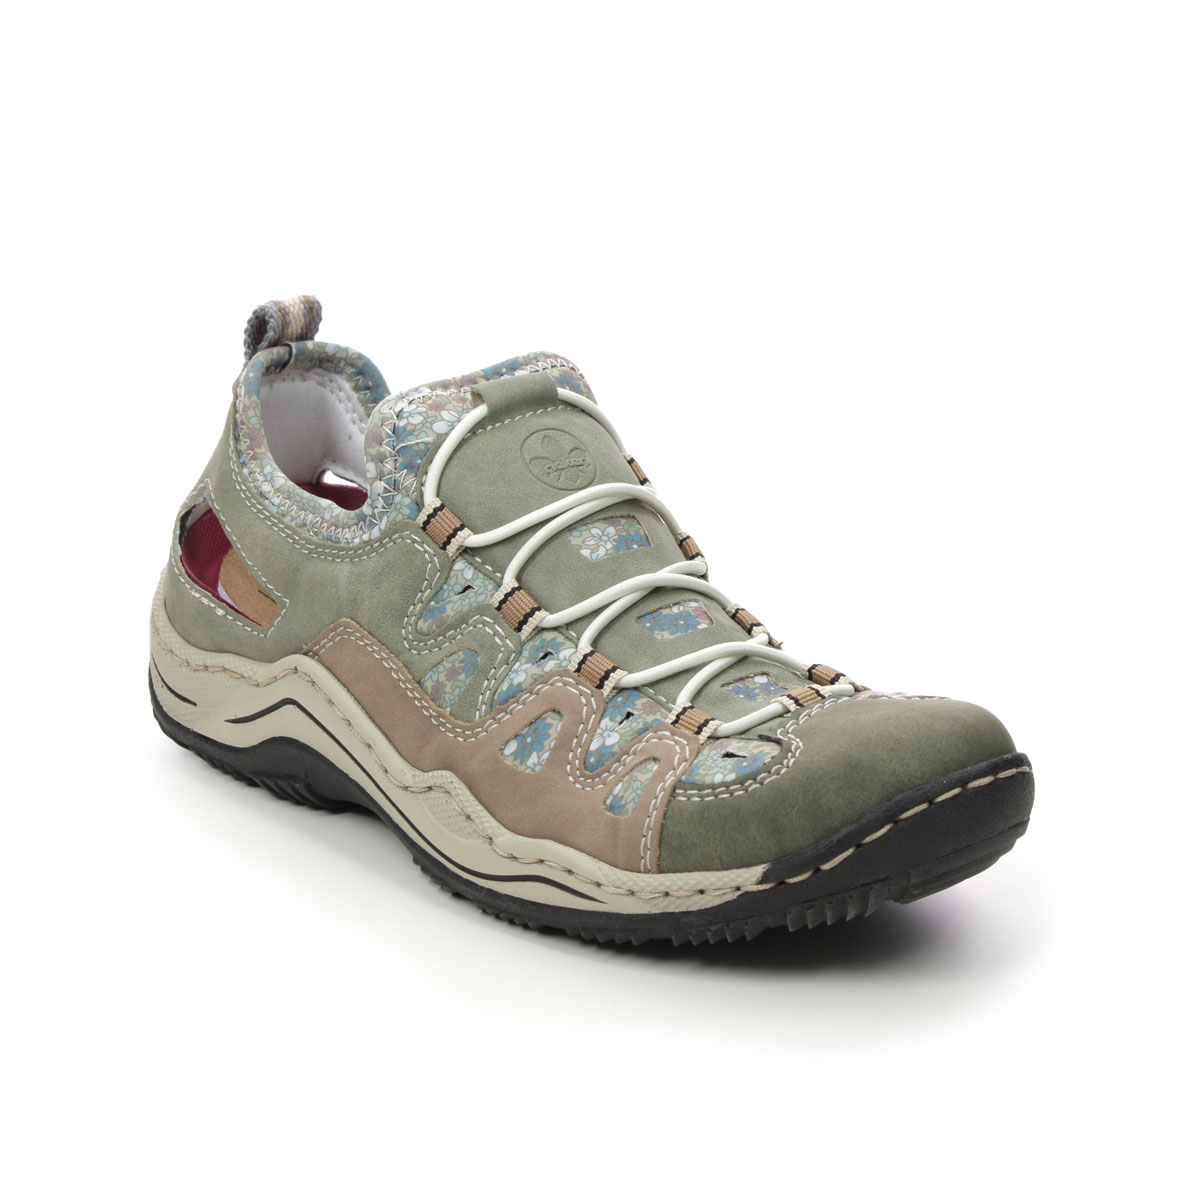 Rieker L0539-52 Sage Womens trainers in a Plain Man-made in Size 38